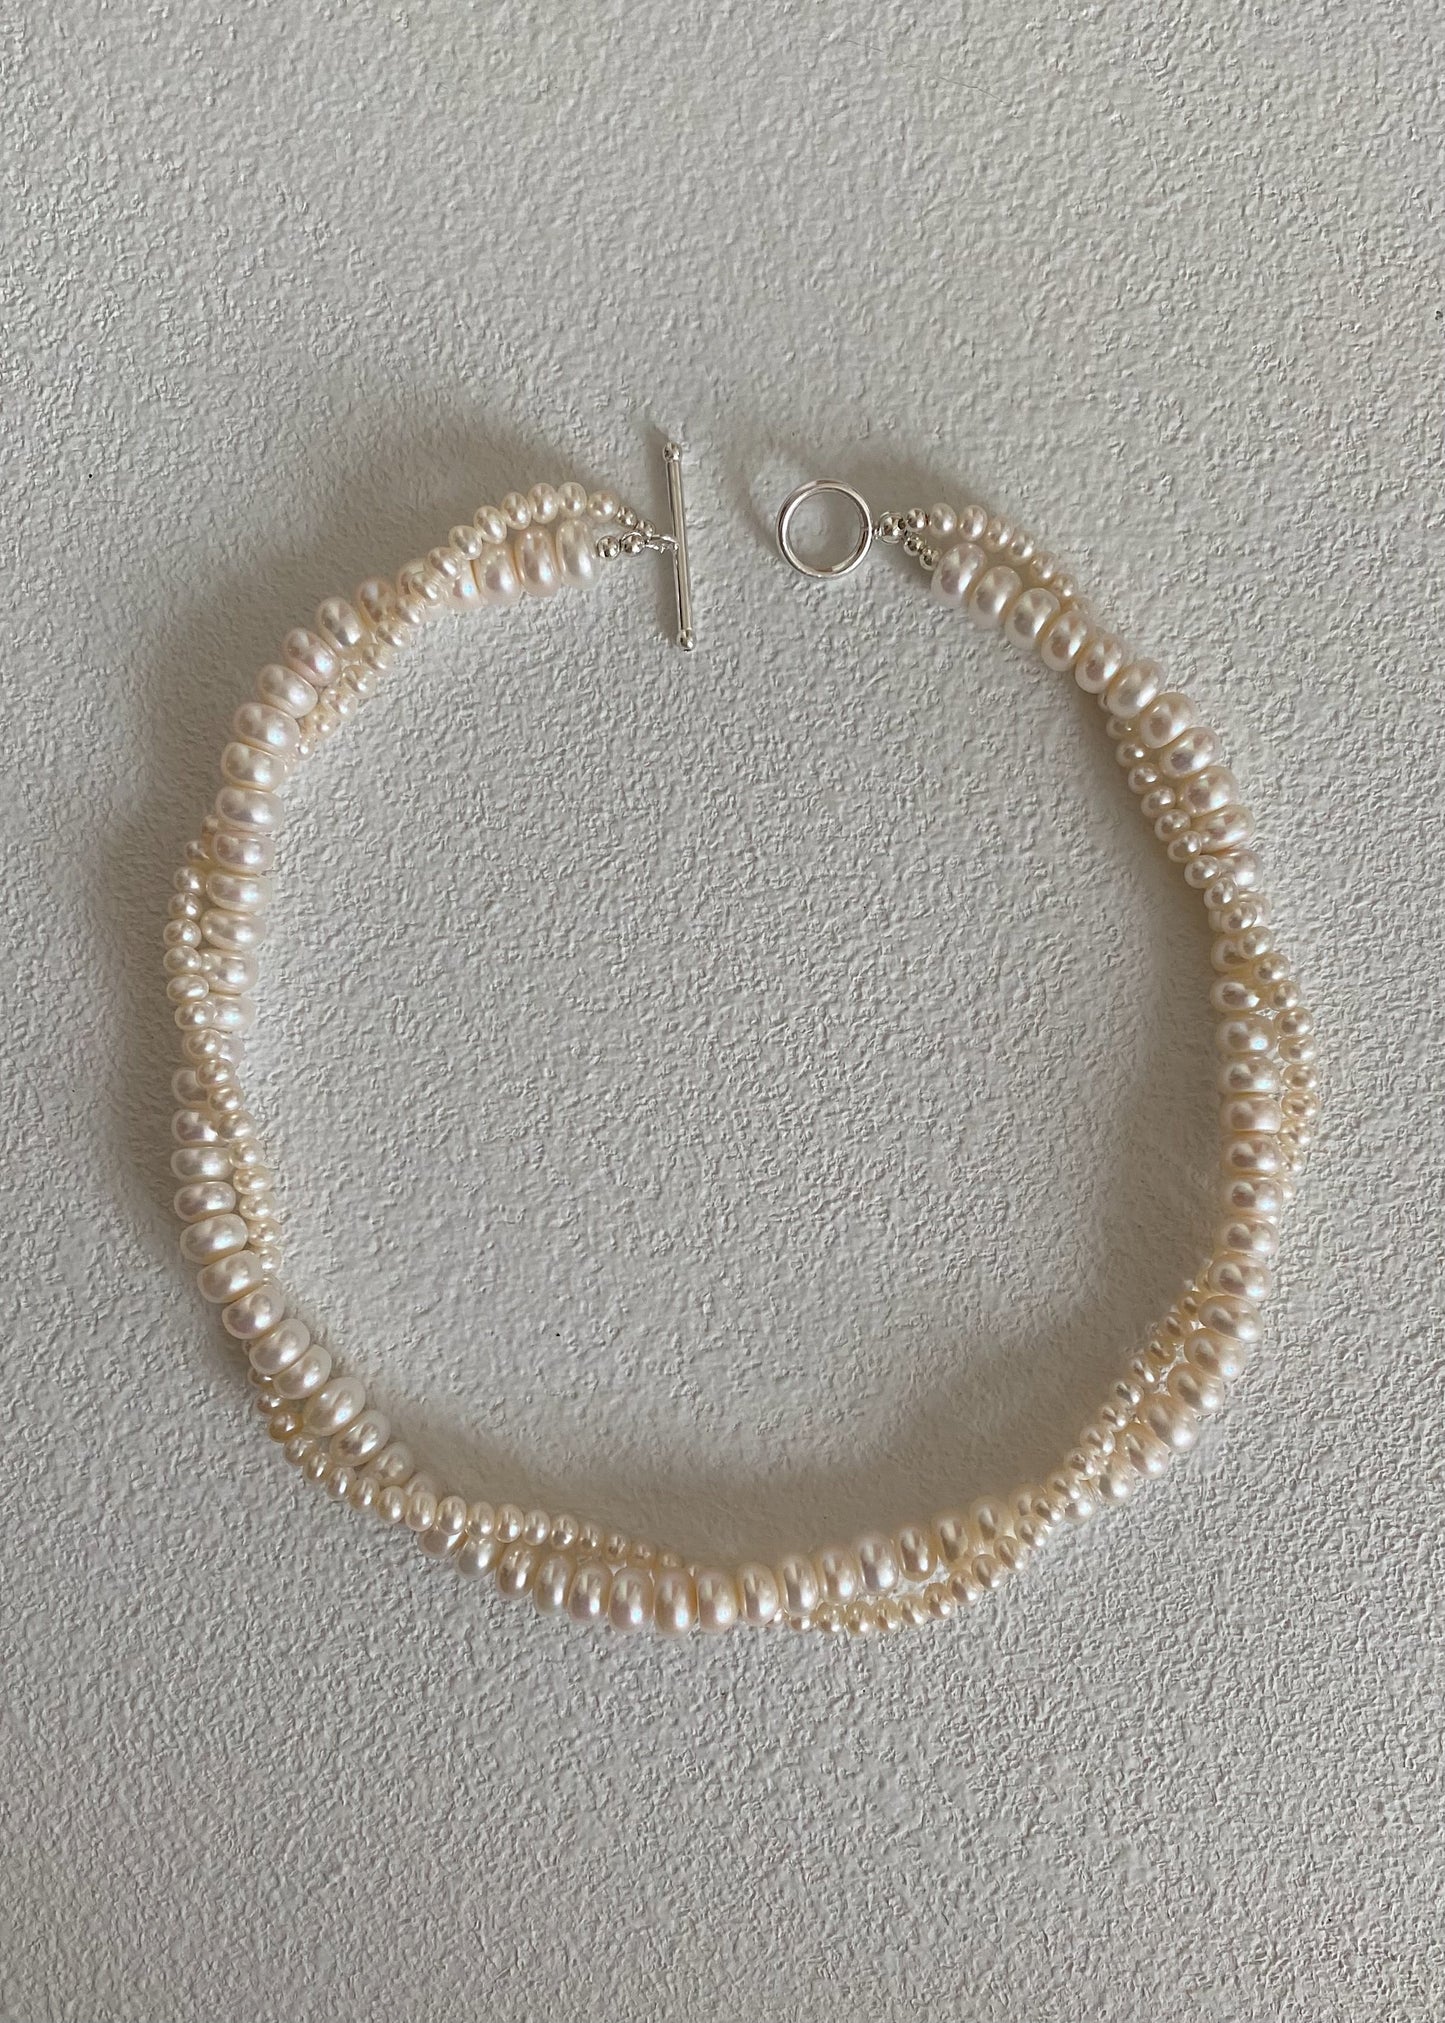 Wild love pearl necklace